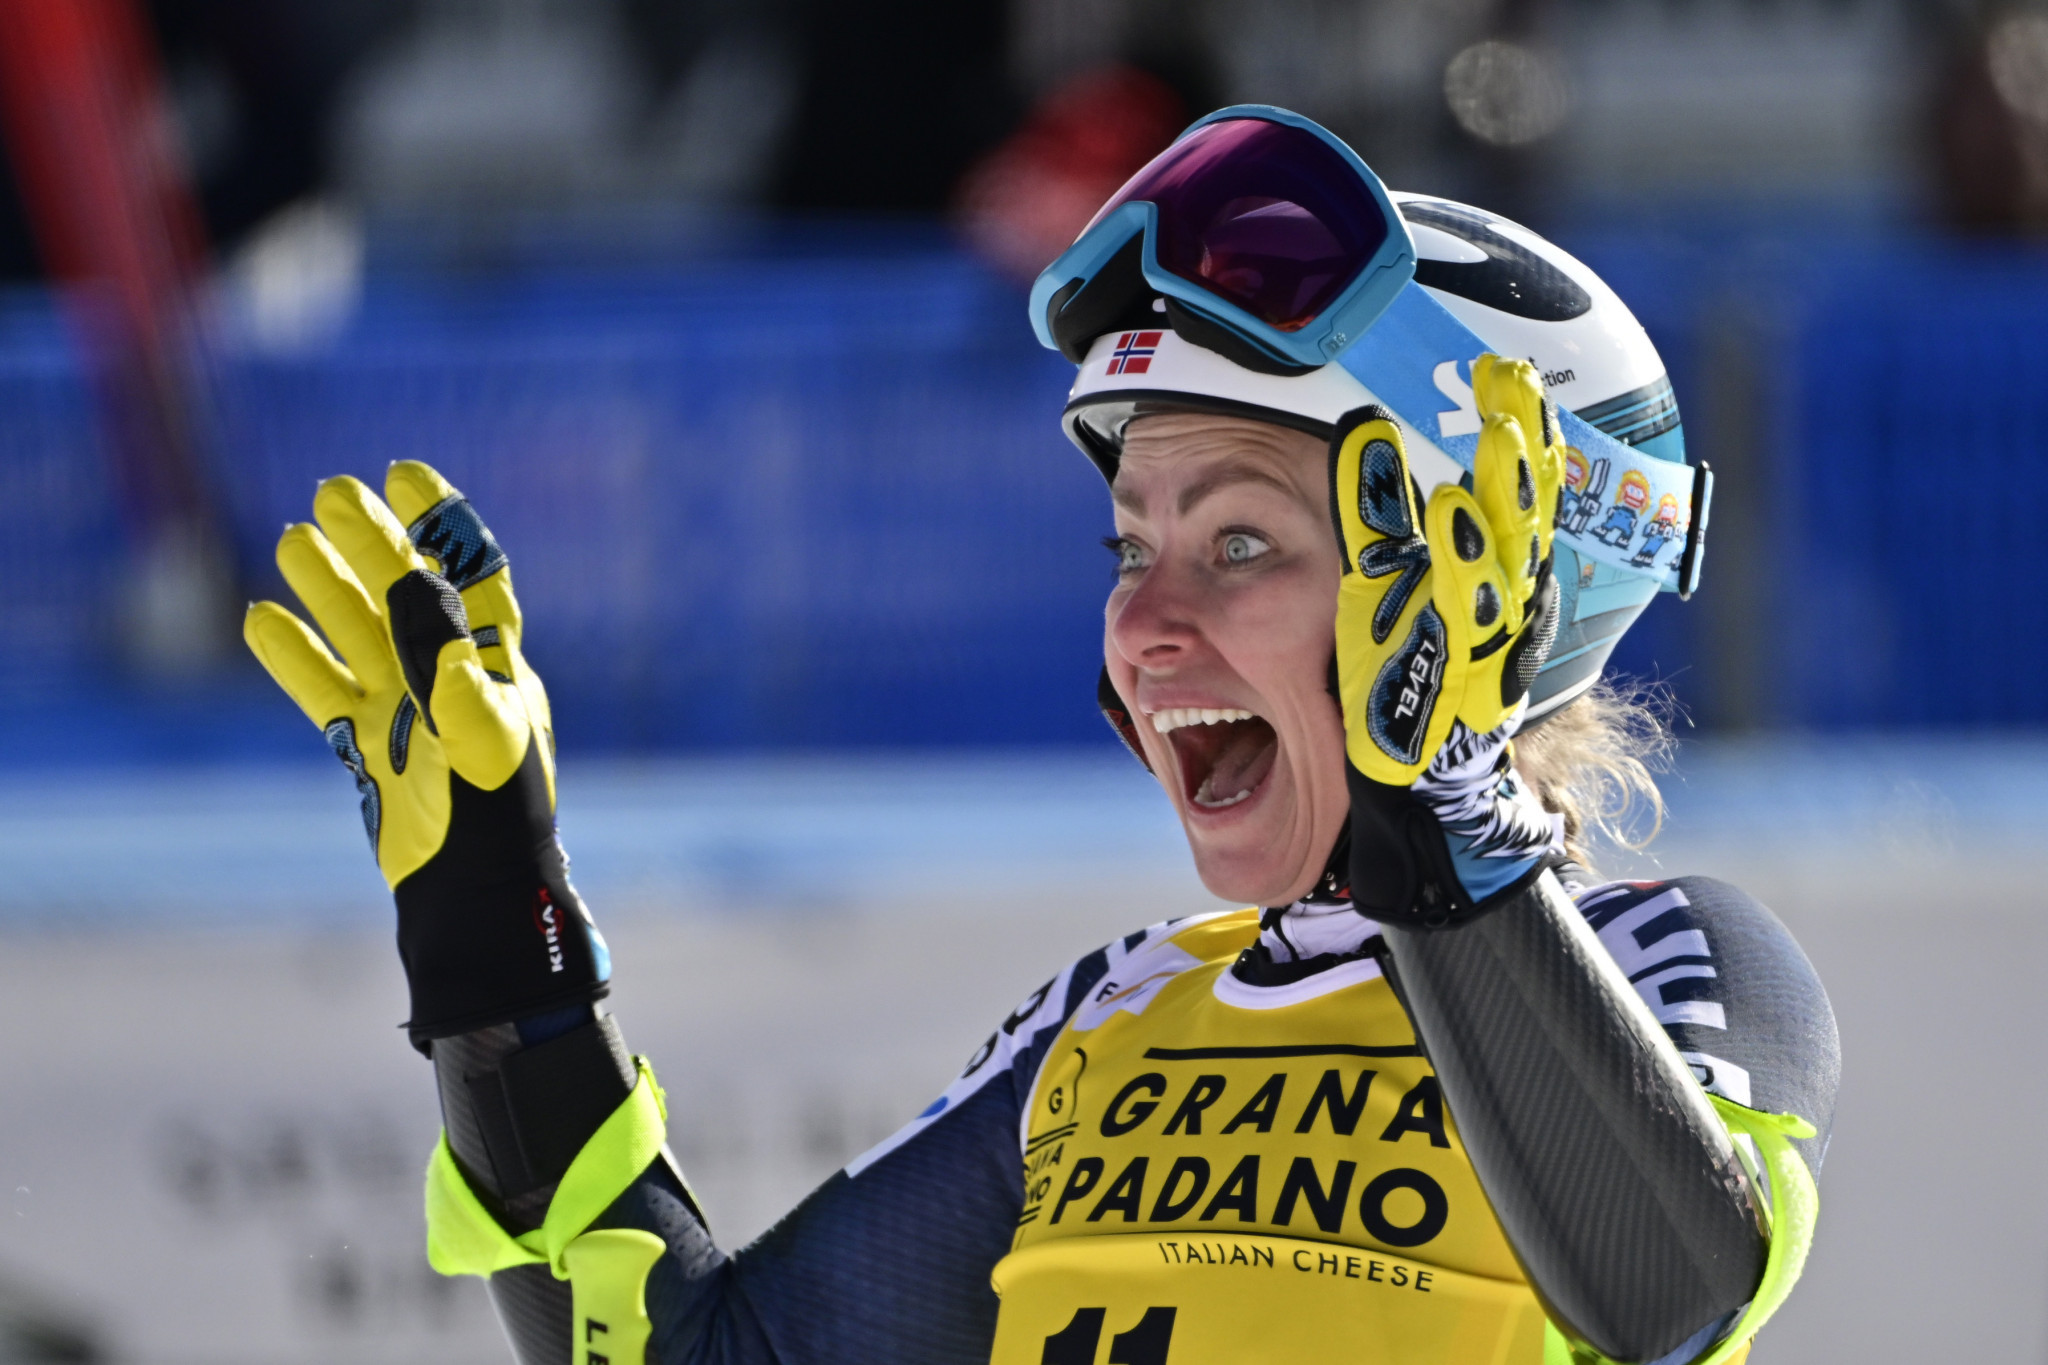 Ranghild Mowinckel was victorious in the women's super-G in Cortina d'Ampezzo ©Getty Images